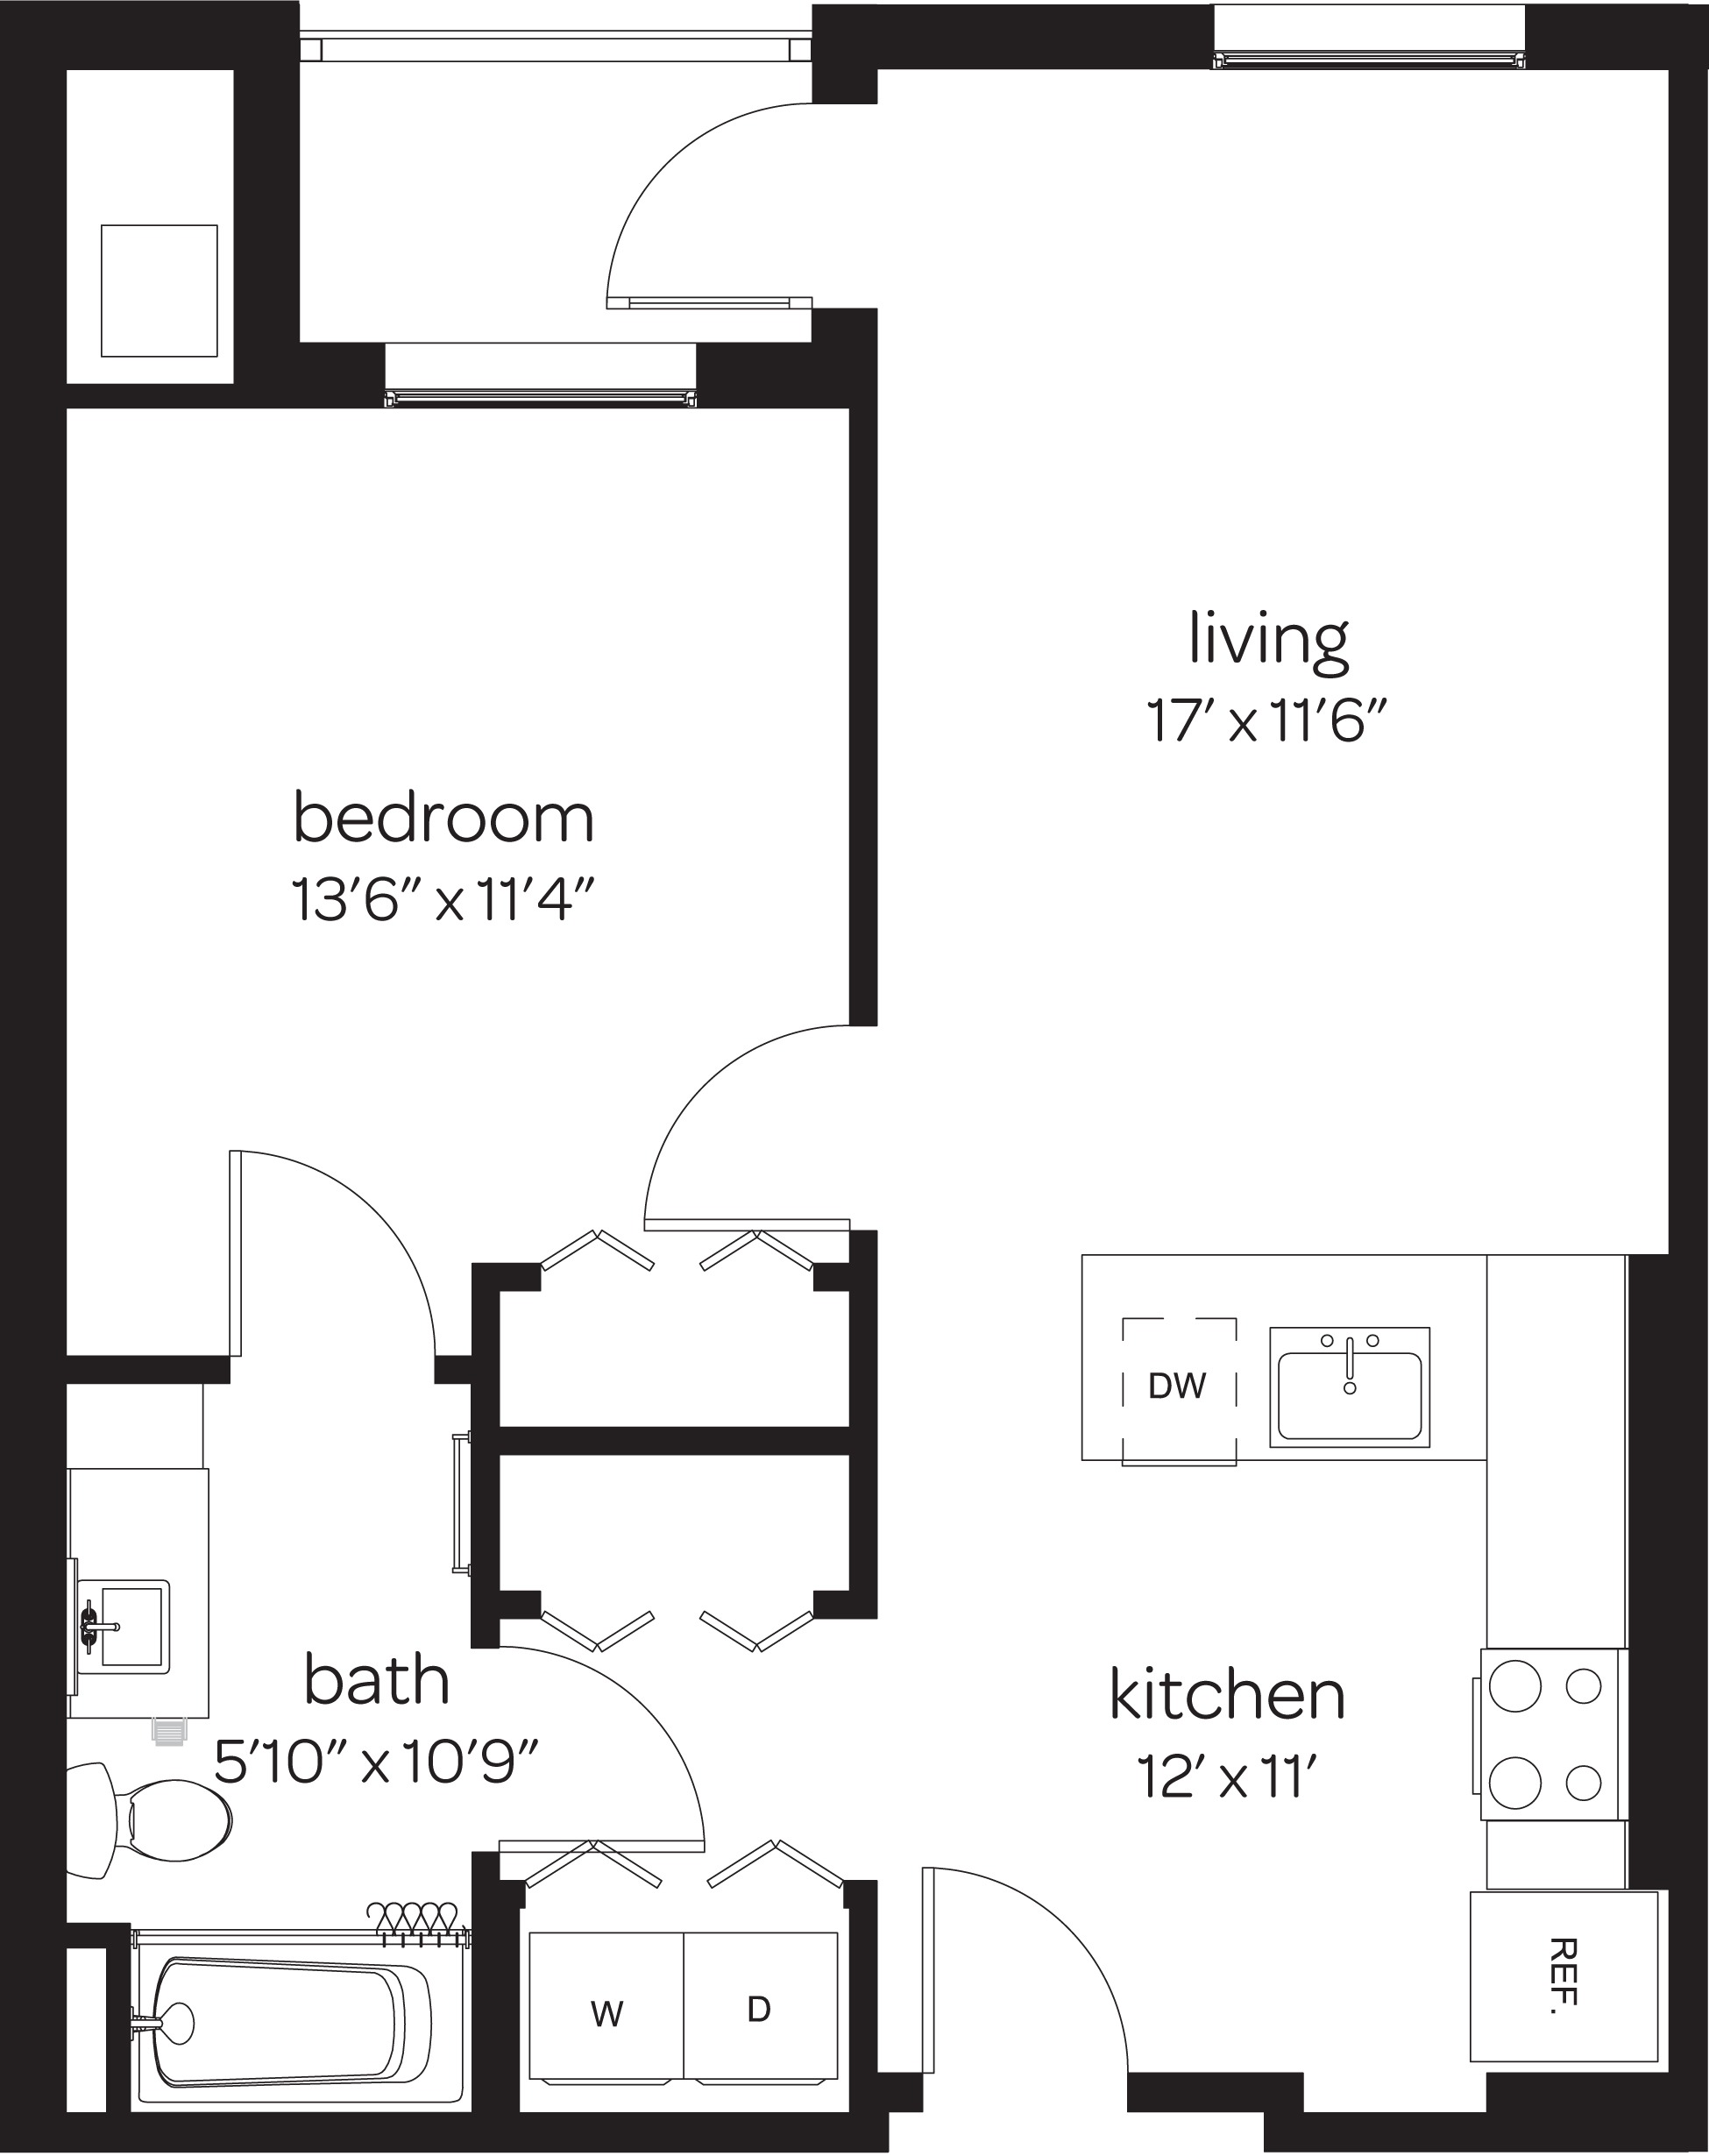 Amazing Concept Bedroom Floor Plan Dimensions, House Plan Drawing